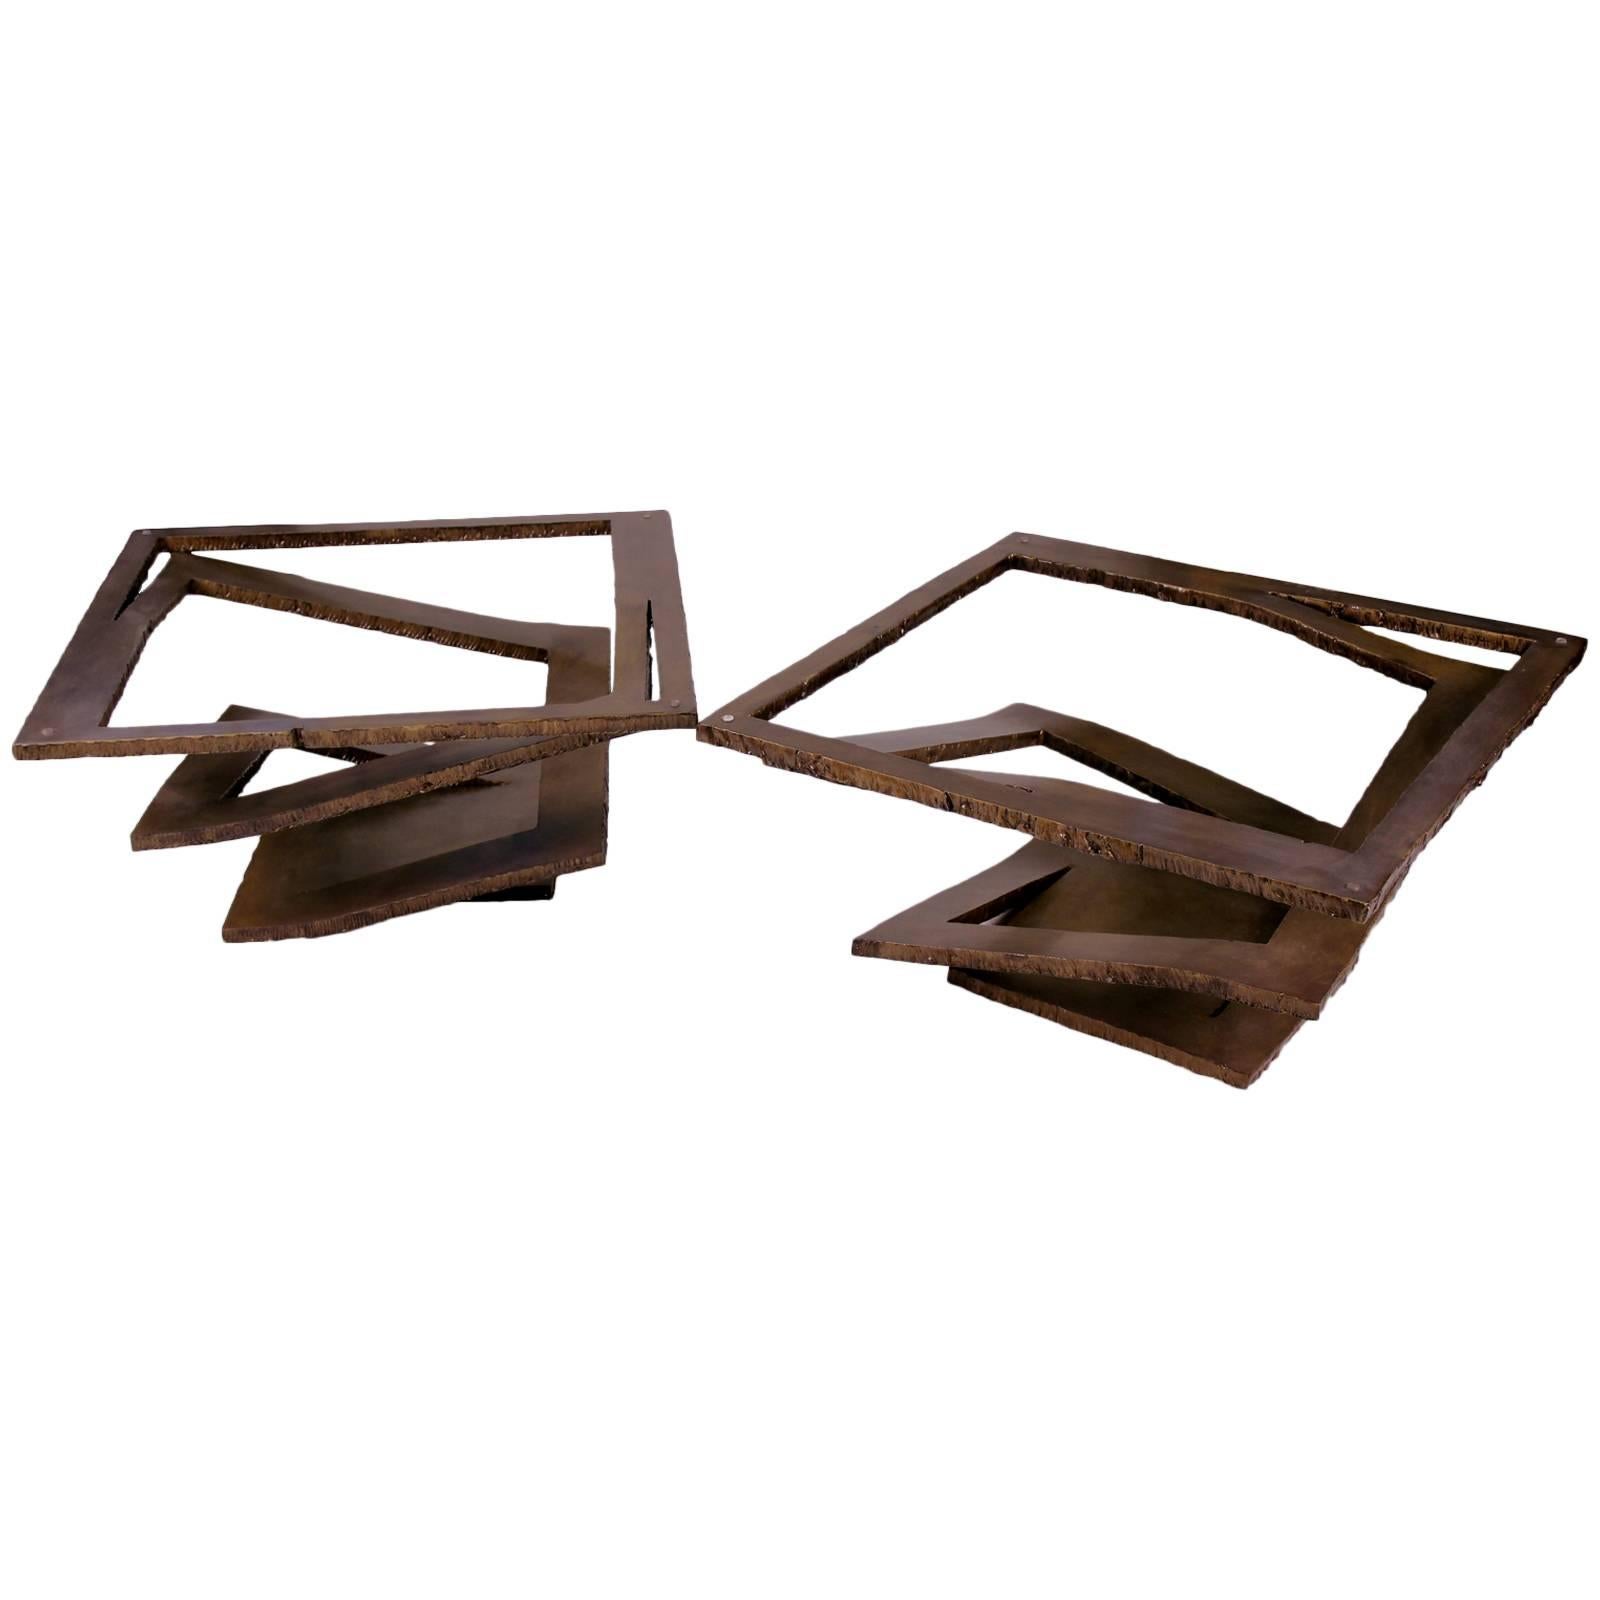 Pair of "Brutalist" Coffee Tables, France, 1970